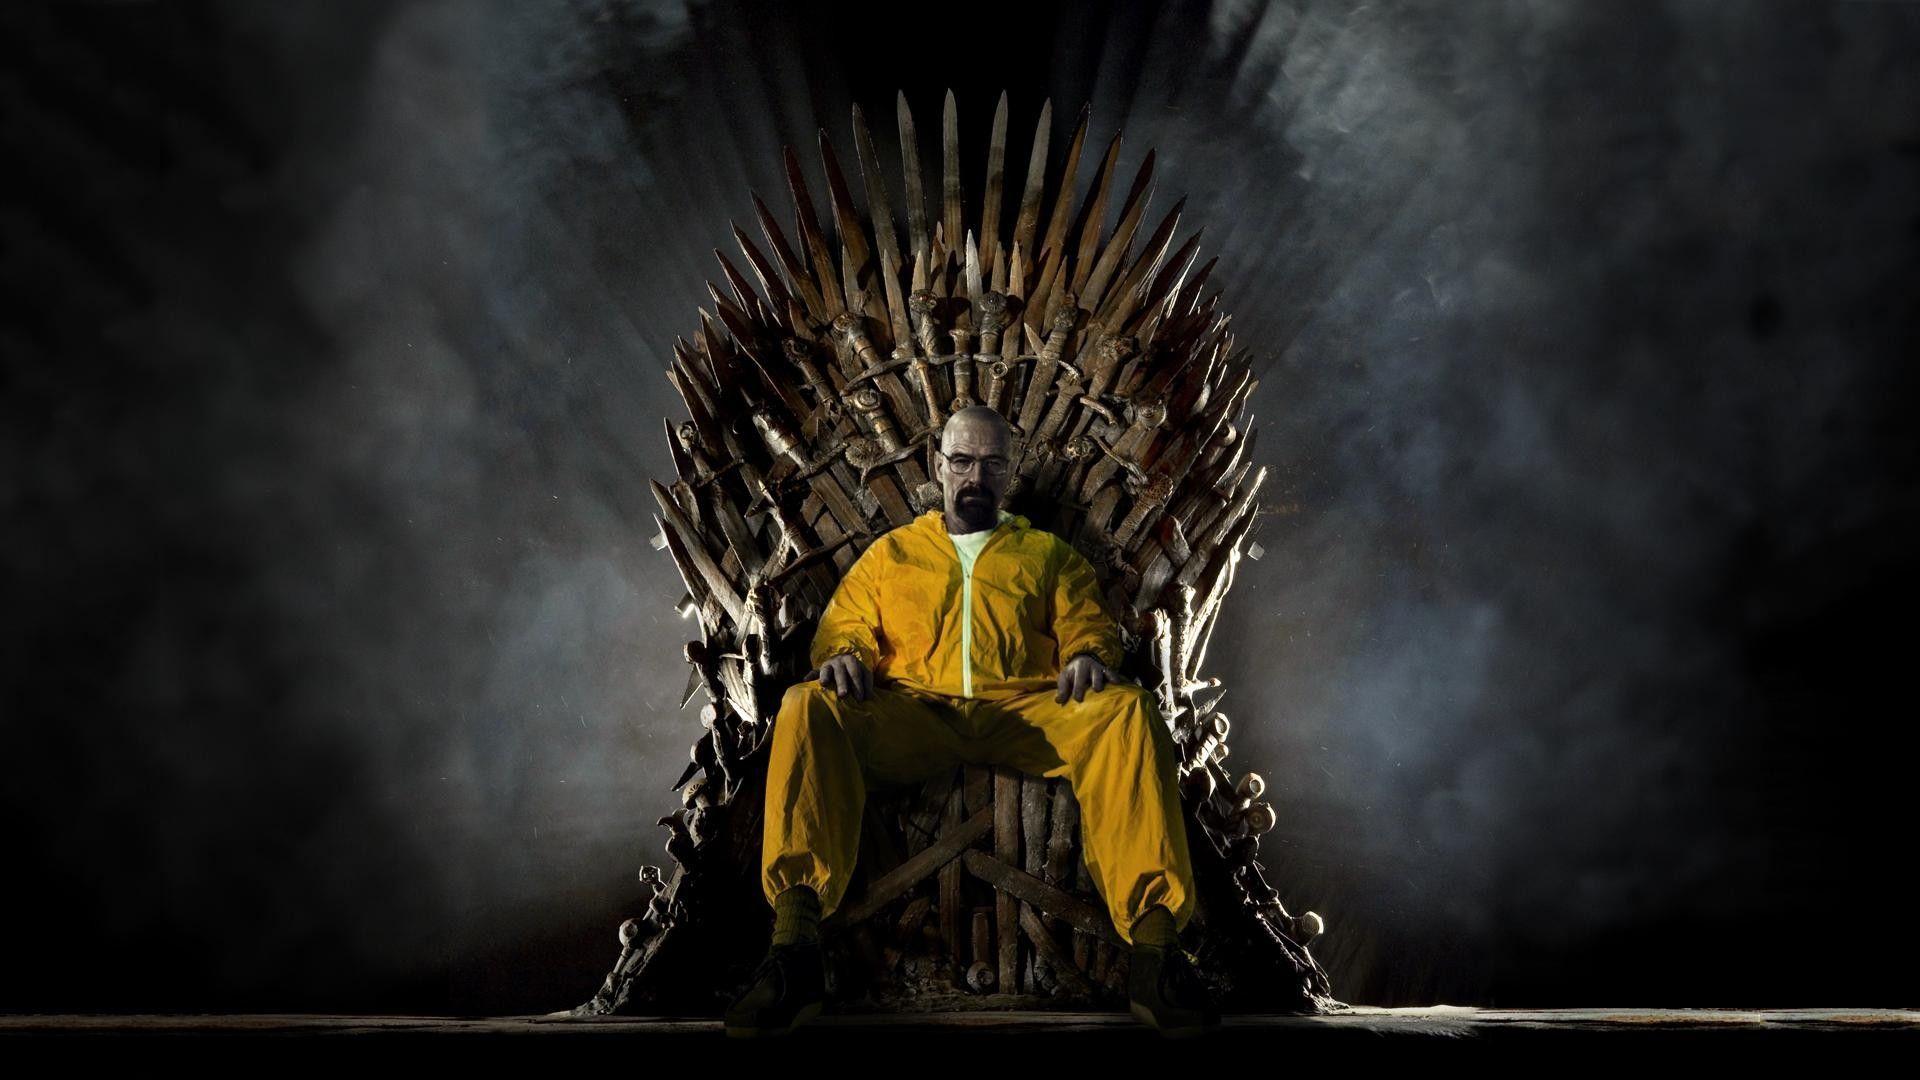 Walter White on the Iron Throne Wallpaper Breaking Bad x Game